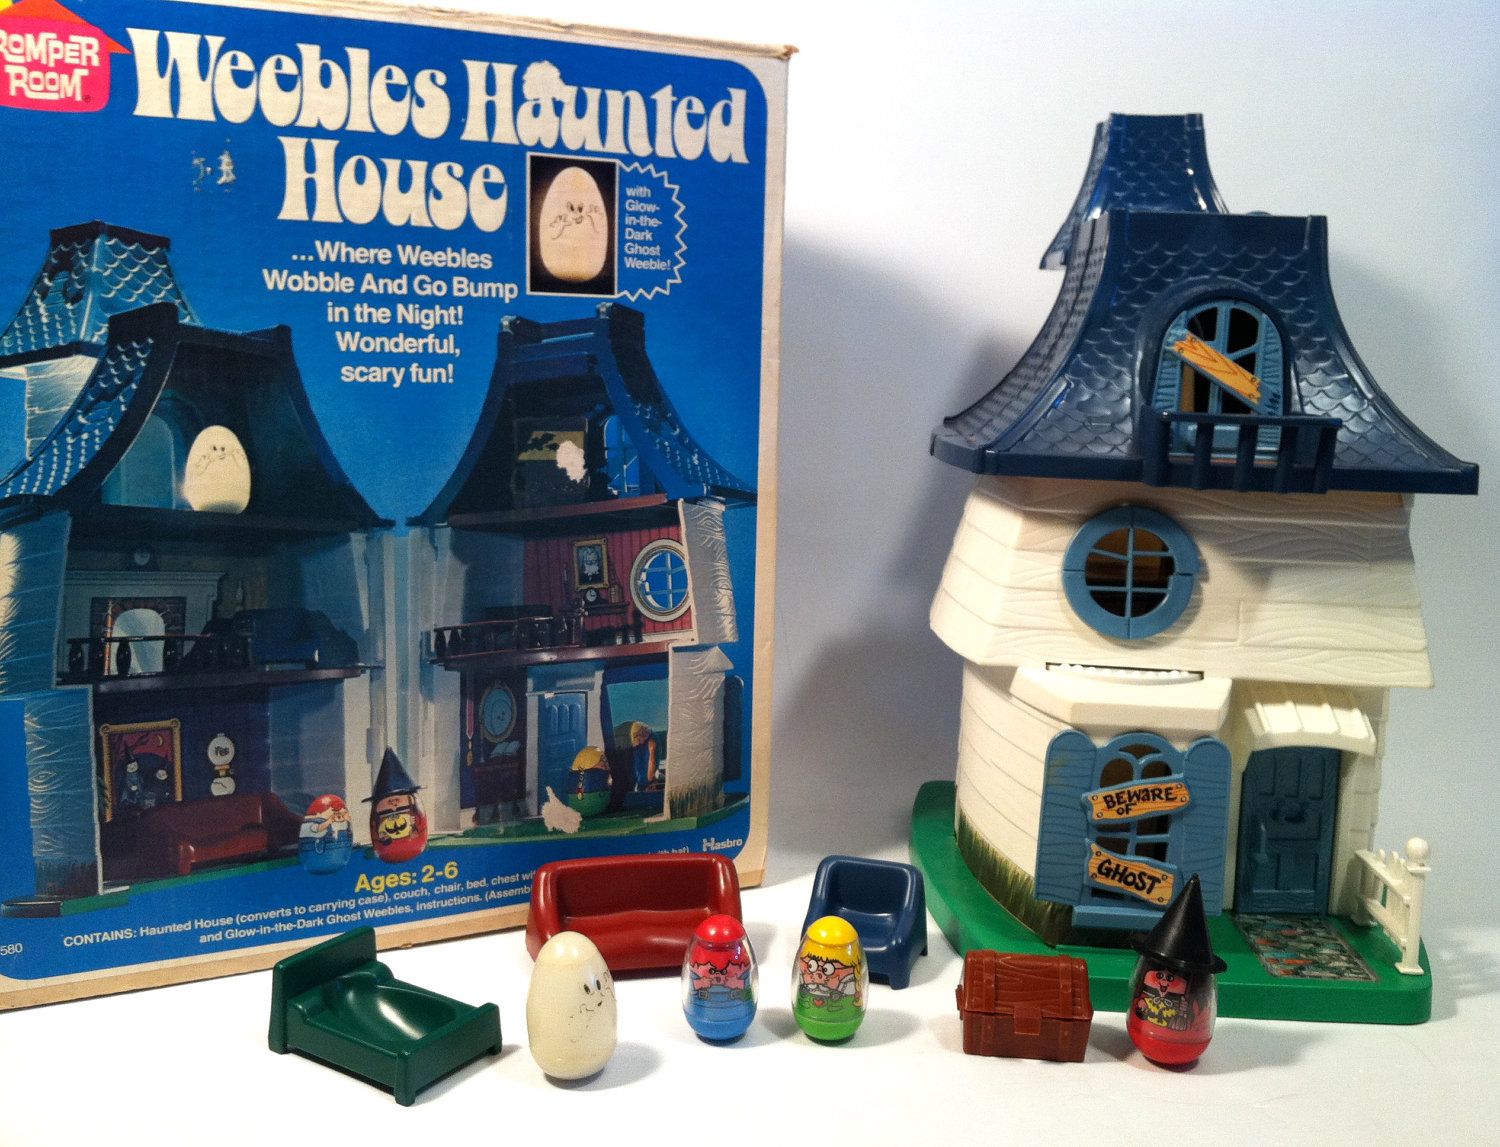 vintage toys - weebles haunted house - Pomper preko Weebles Haunted 5 House Room Glow inthe Dark Weeble! Ghost ...Where Weebles Wobble And Go Bump in the Night! Wonderful, scary fun! Beware Hasbro Ghost Ages 26 Contains Haunted House converts to carrying 